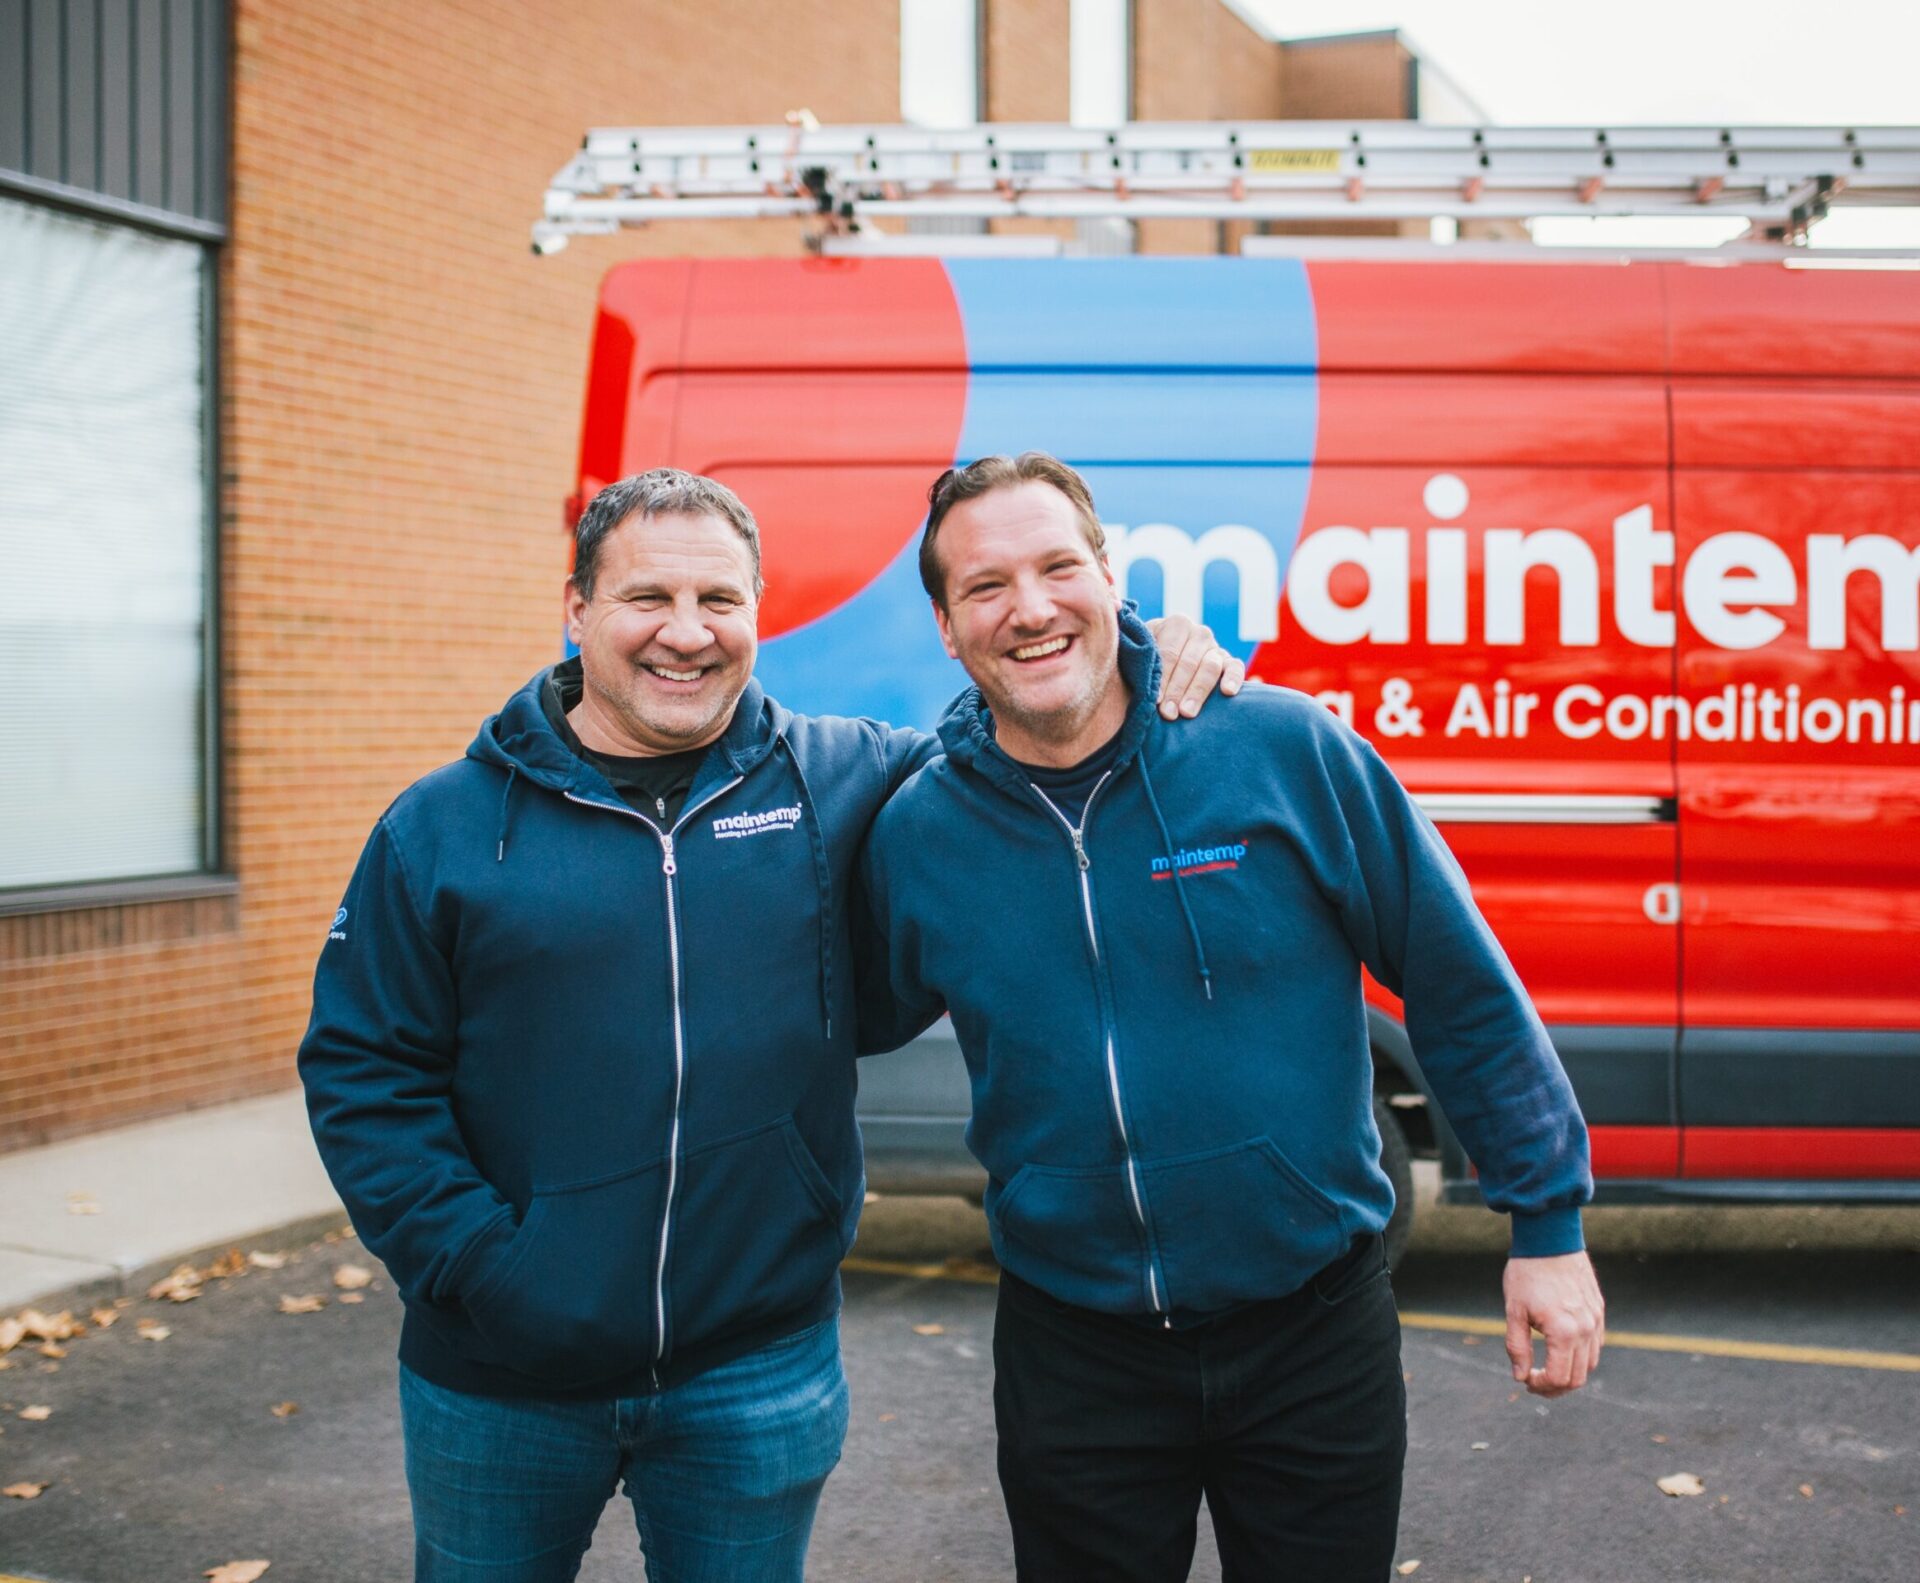 Two people smiling in front of a red van labeled "maintenance & Air Conditioning," wearing matching blue work jackets with logo, in daylight.